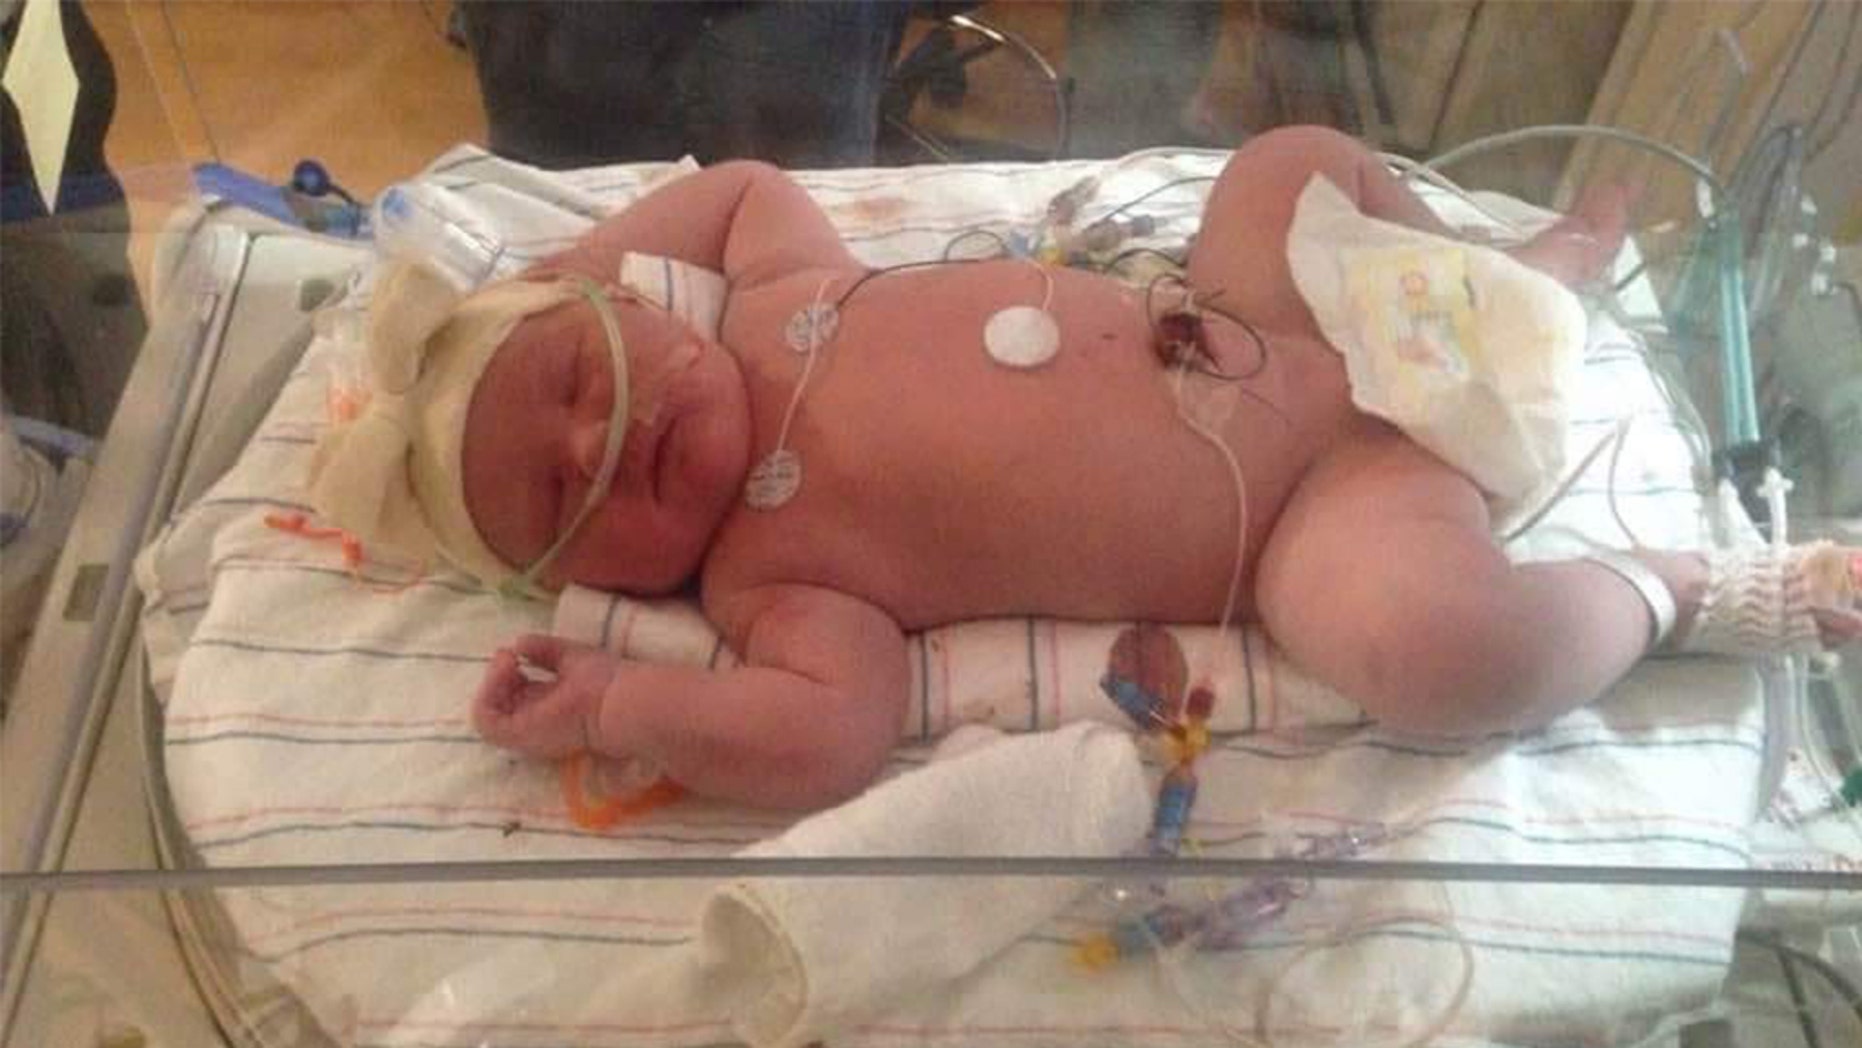 Joy Buckley gave birth to a 15-ounce 15-ounce baby in a hospital in upstate New York on Tuesday.